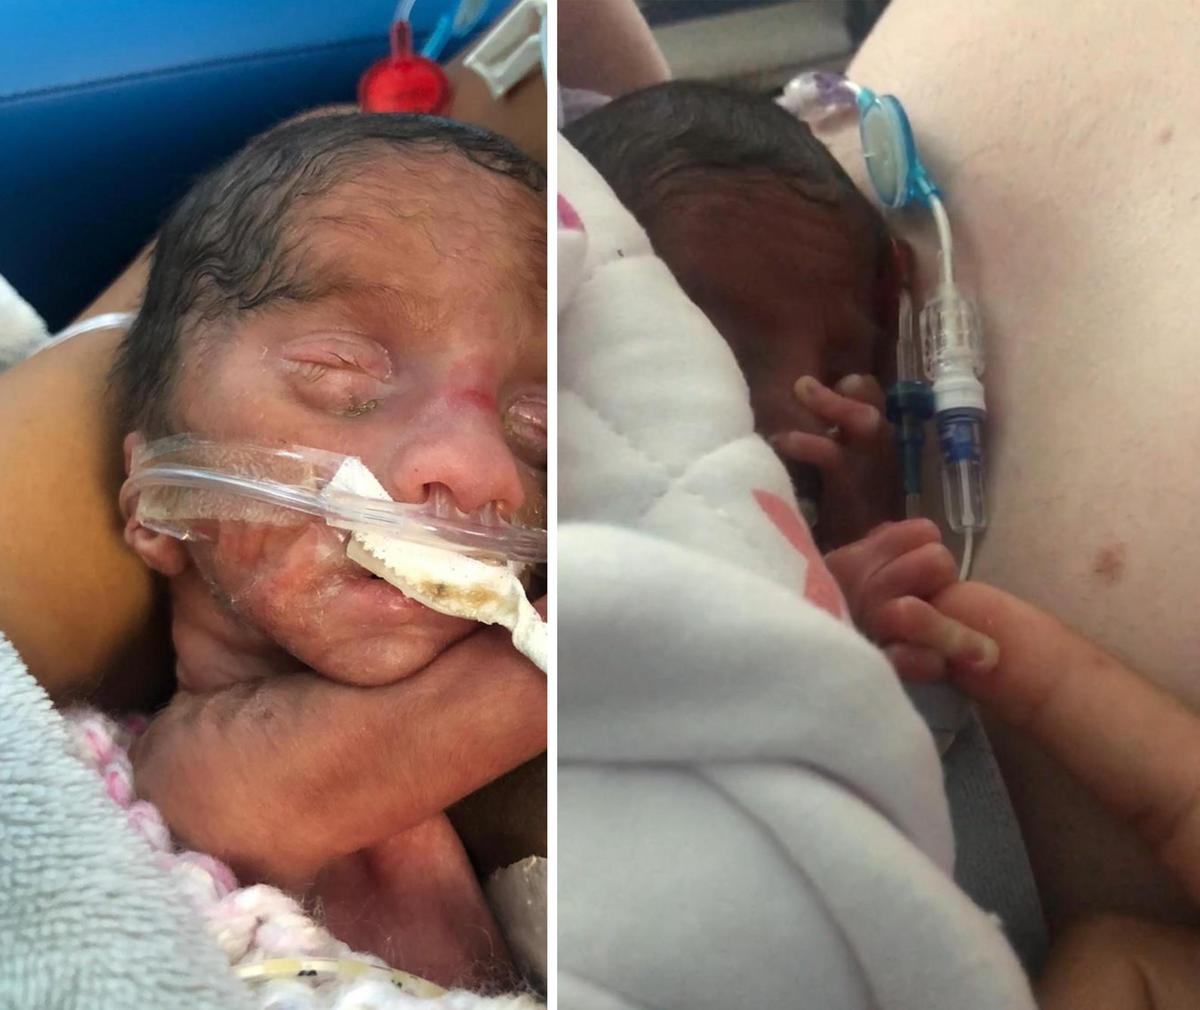 Preemie baby Arabella. (Courtesy of Caters News)